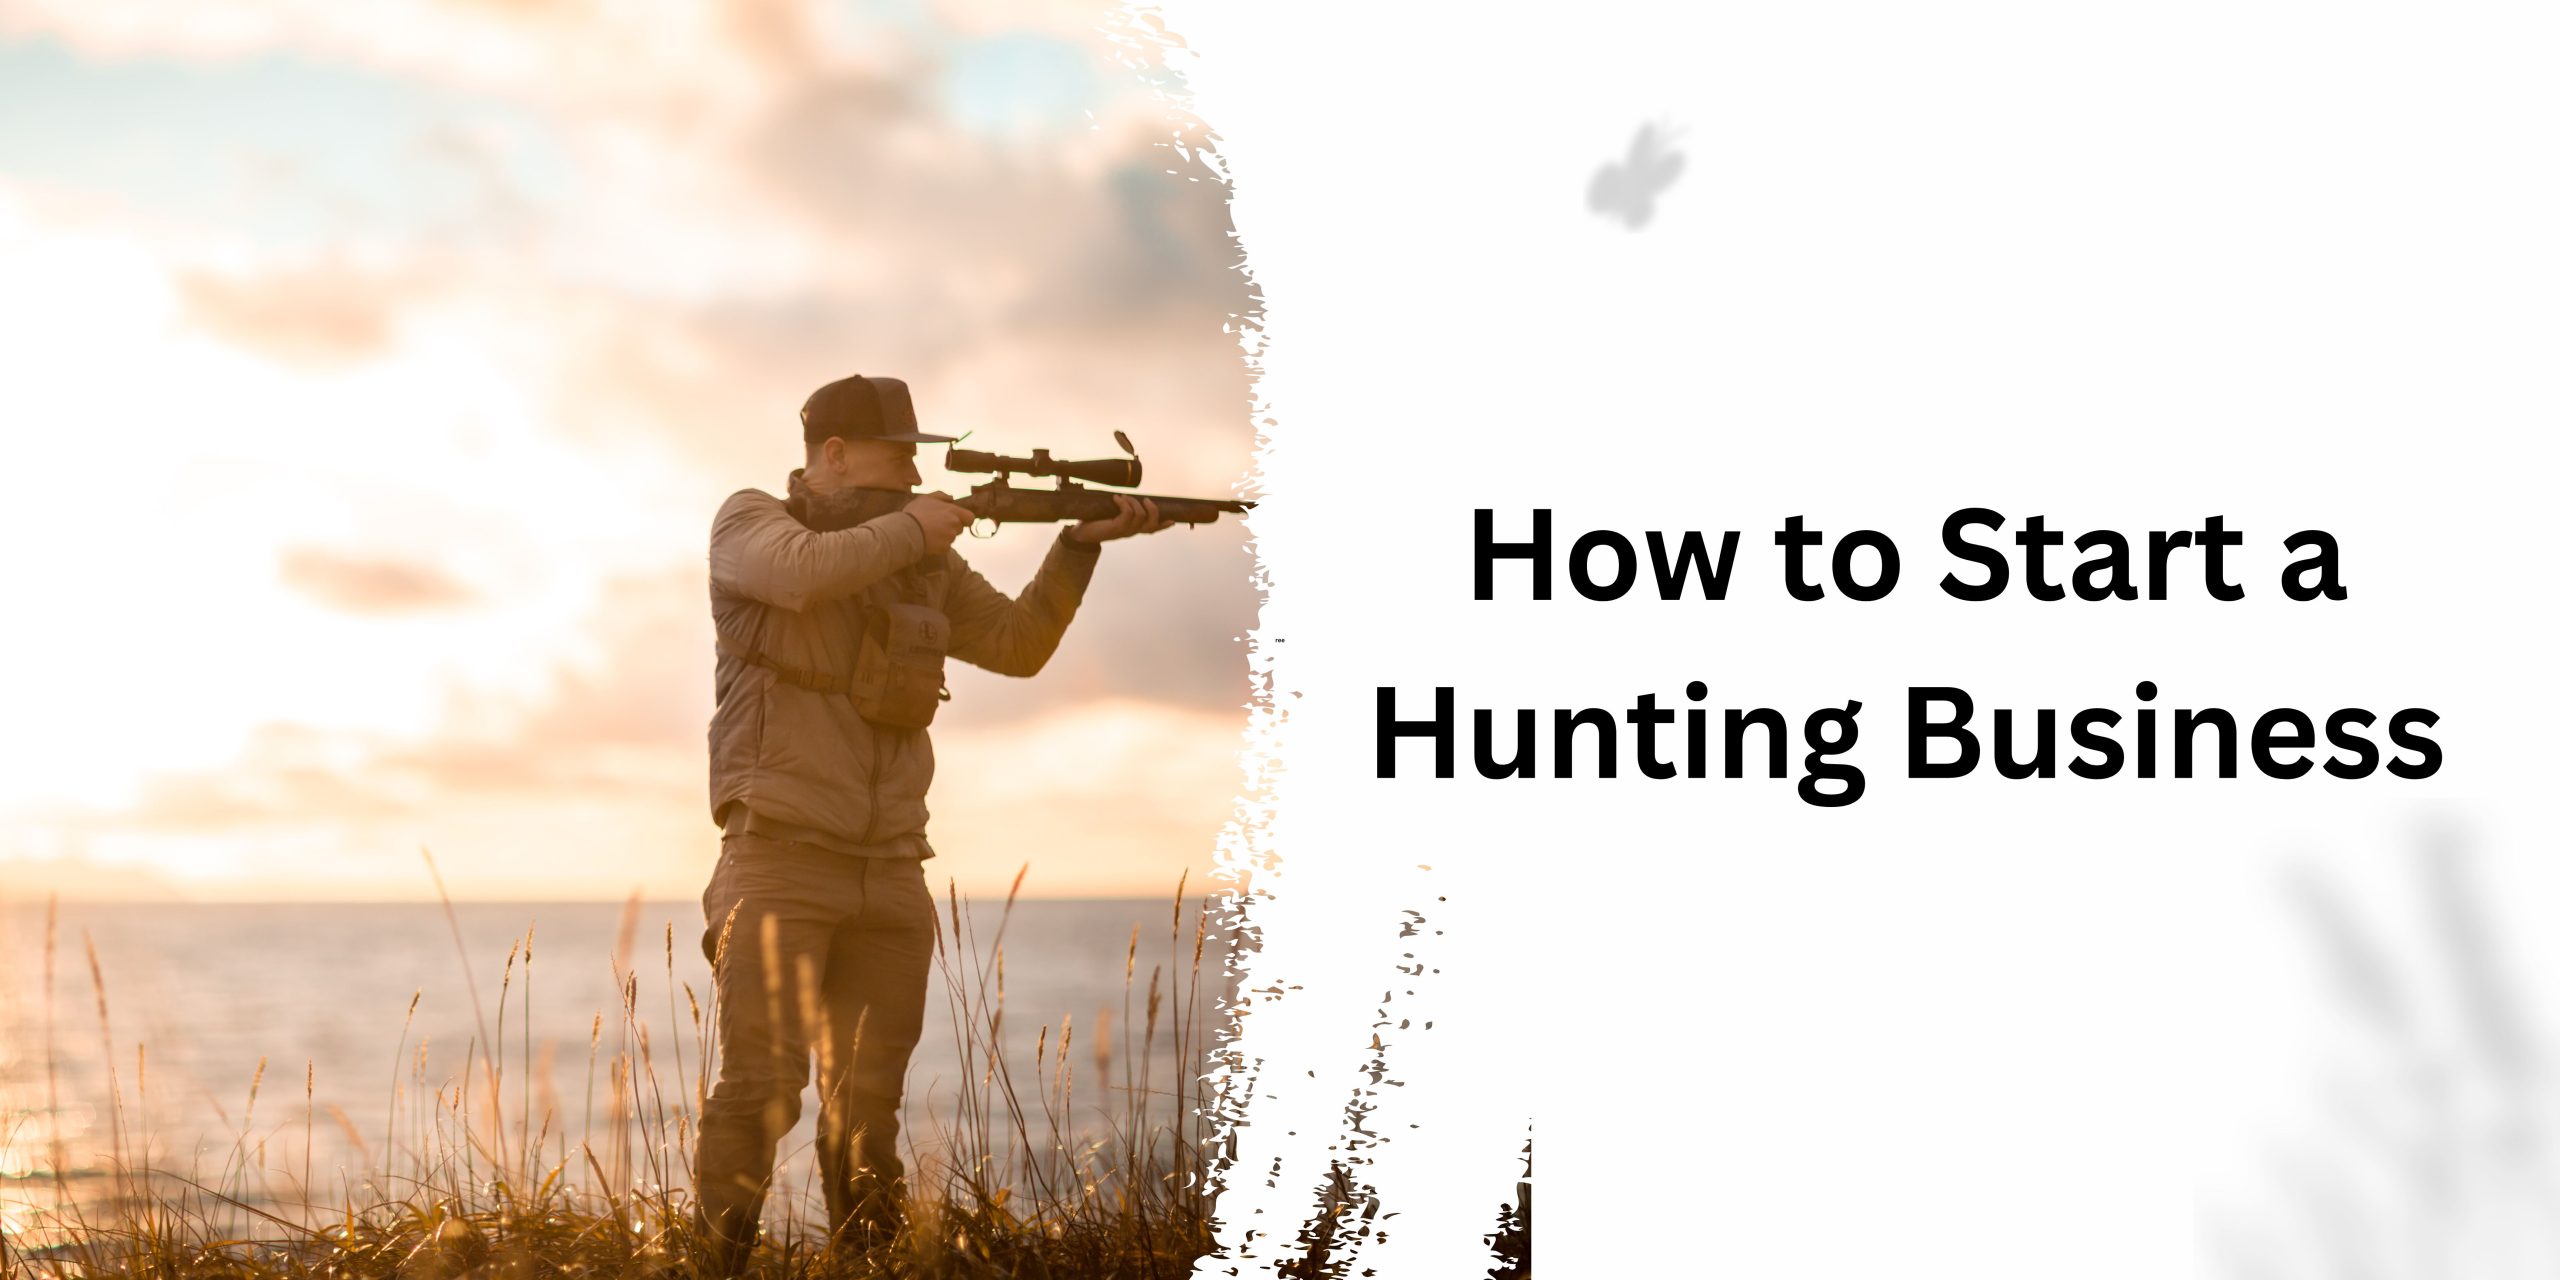 How to Start a Hunting Business